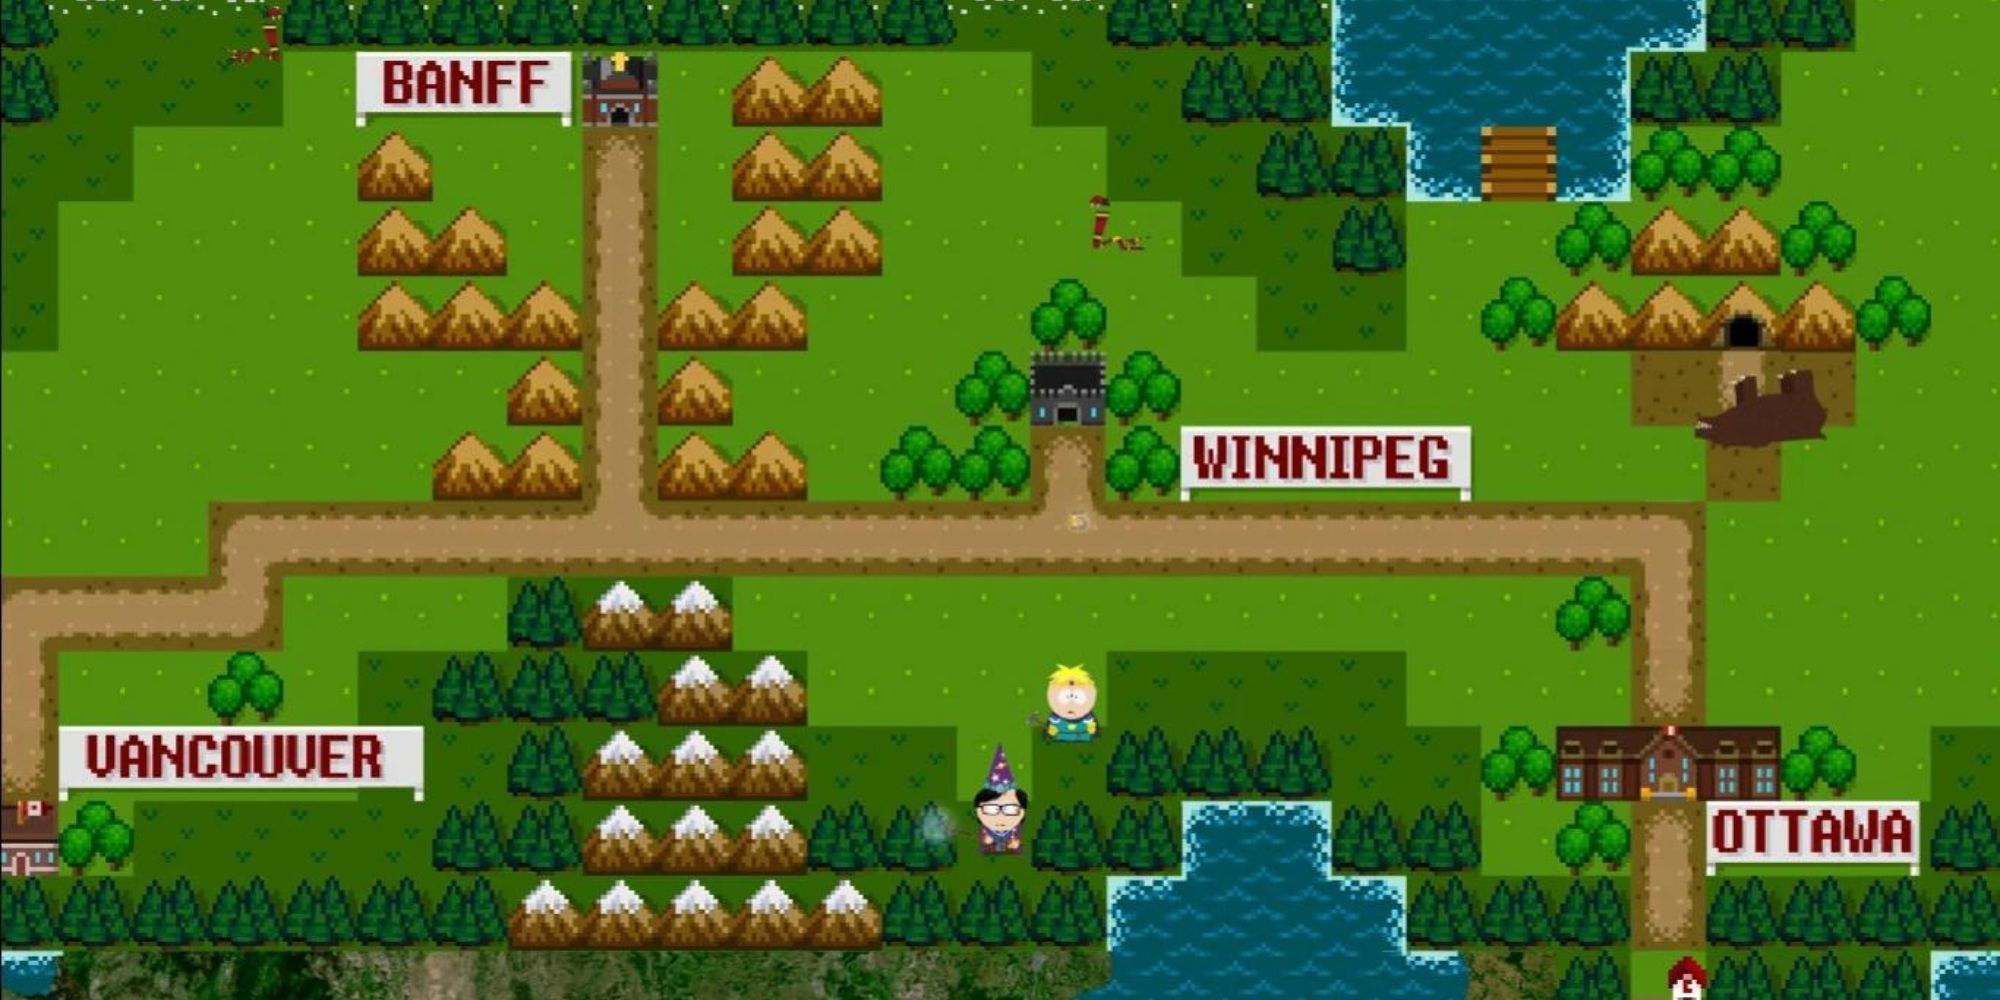 Butters and the hero stand on a 8-bit version of Canada